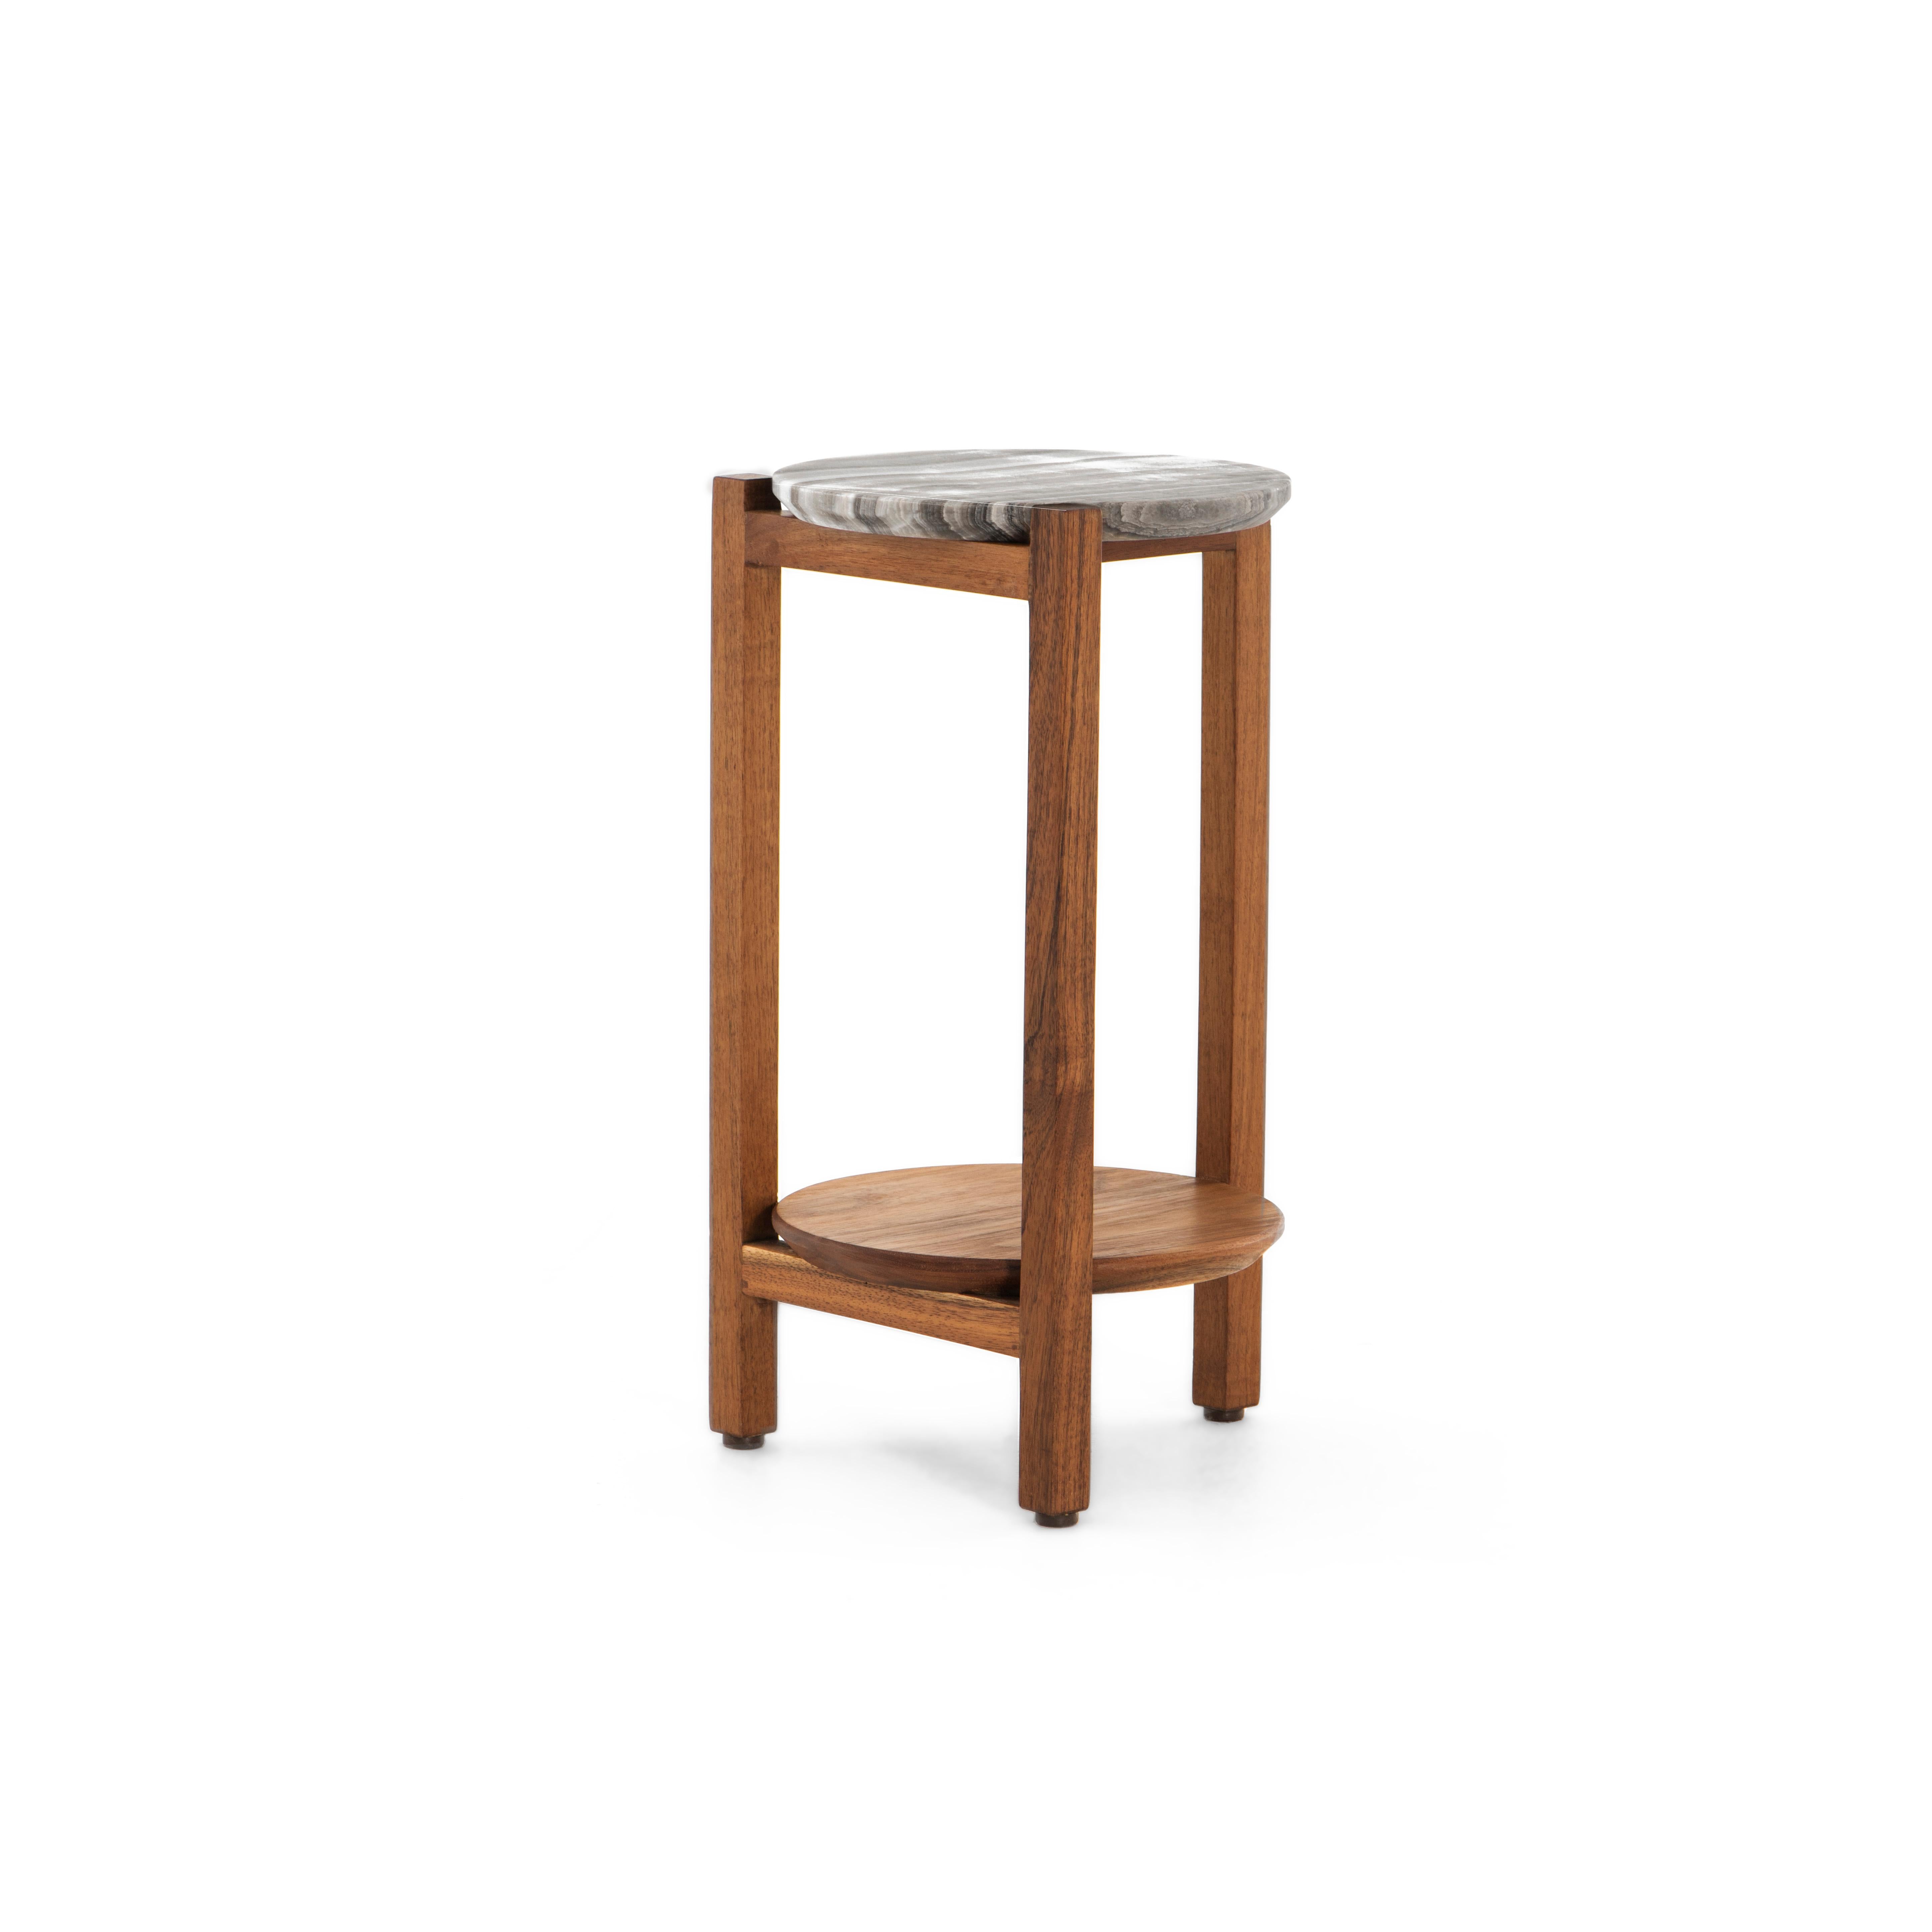 Other Mesa Auxiliar B, Mexican Contemporary Side Table by Emiliano Molina for Cuchara For Sale